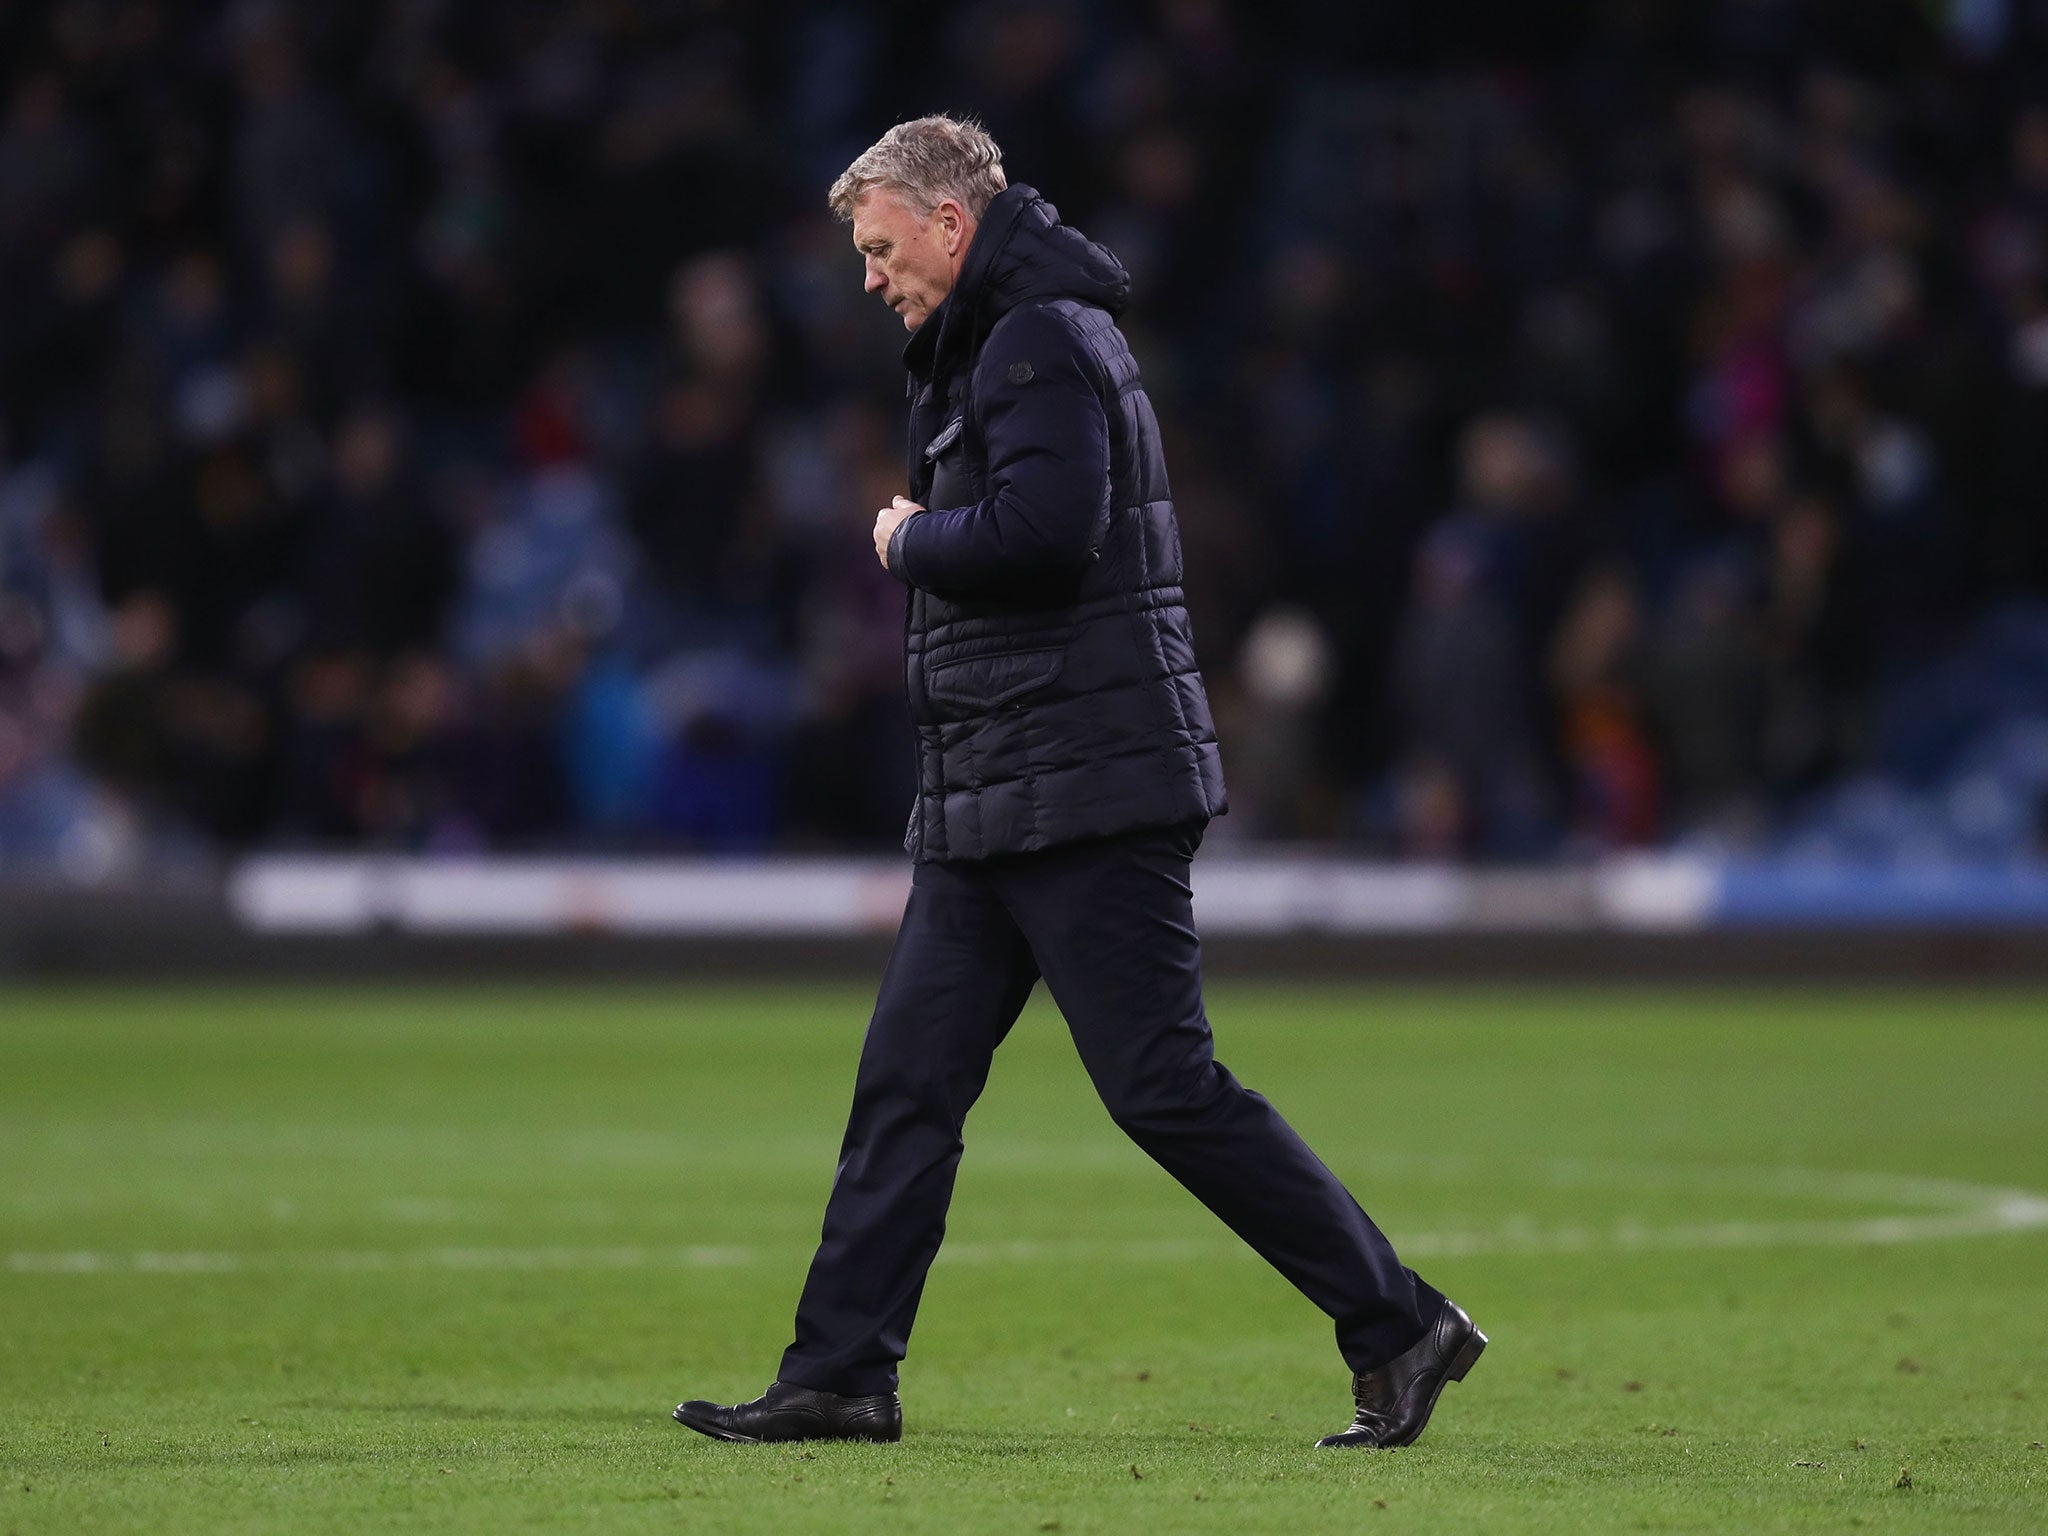 The result is a major setback for David Moyes and his hopes of keeping Sunderland in the Premier League